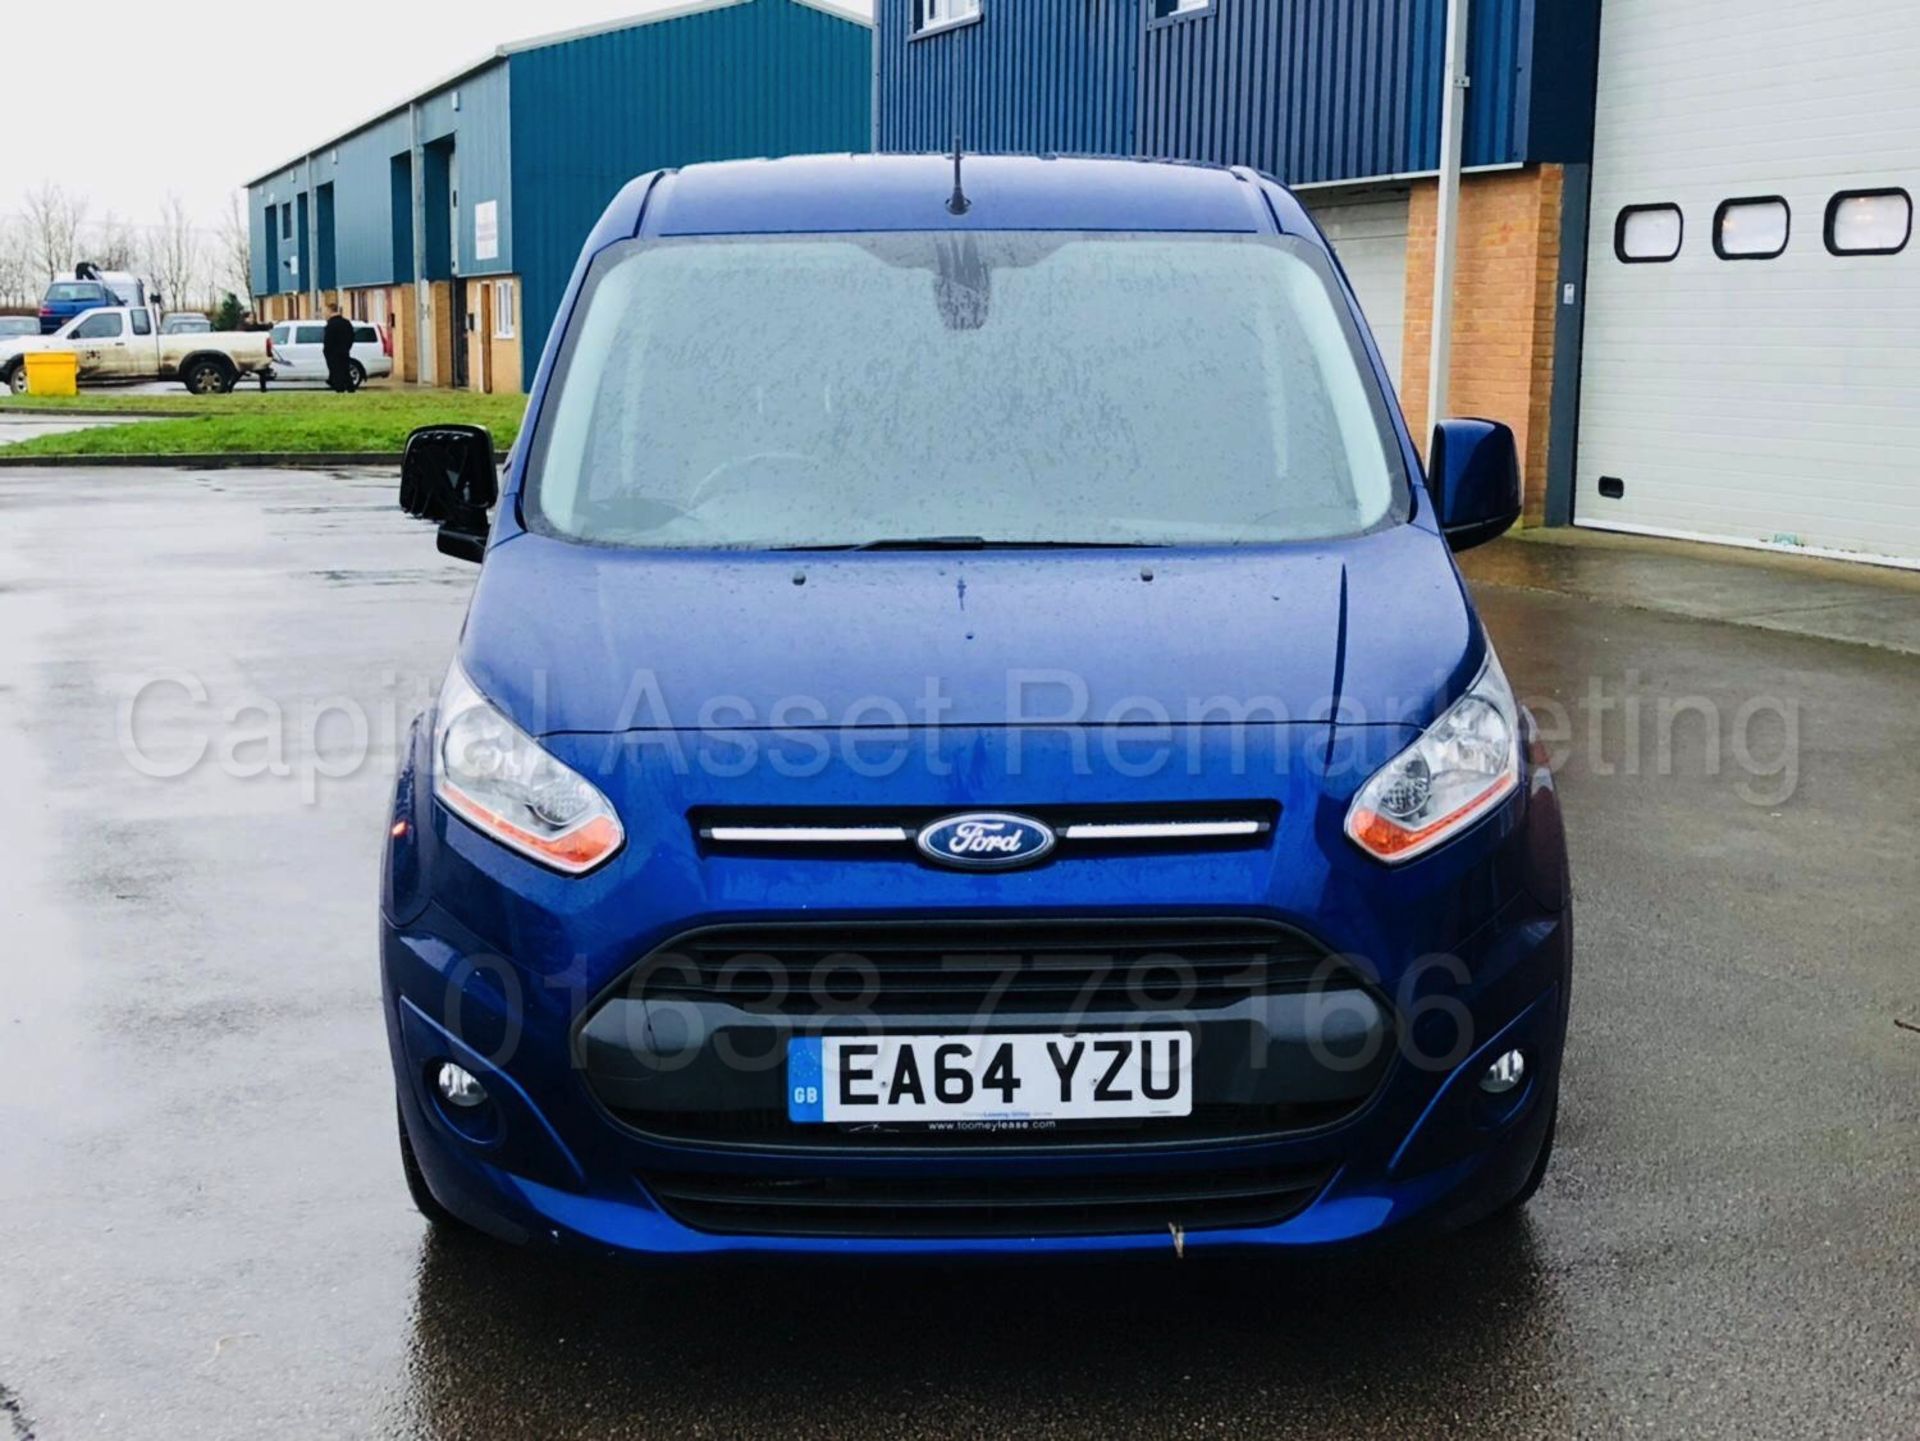 FORD TRANSIT CONNECT 'LIMITED' (2015 - FACELIFT MODEL) '1.6 TDCI - 115 PS - 6 SPEED' *A/C* (1 OWNER) - Image 8 of 28